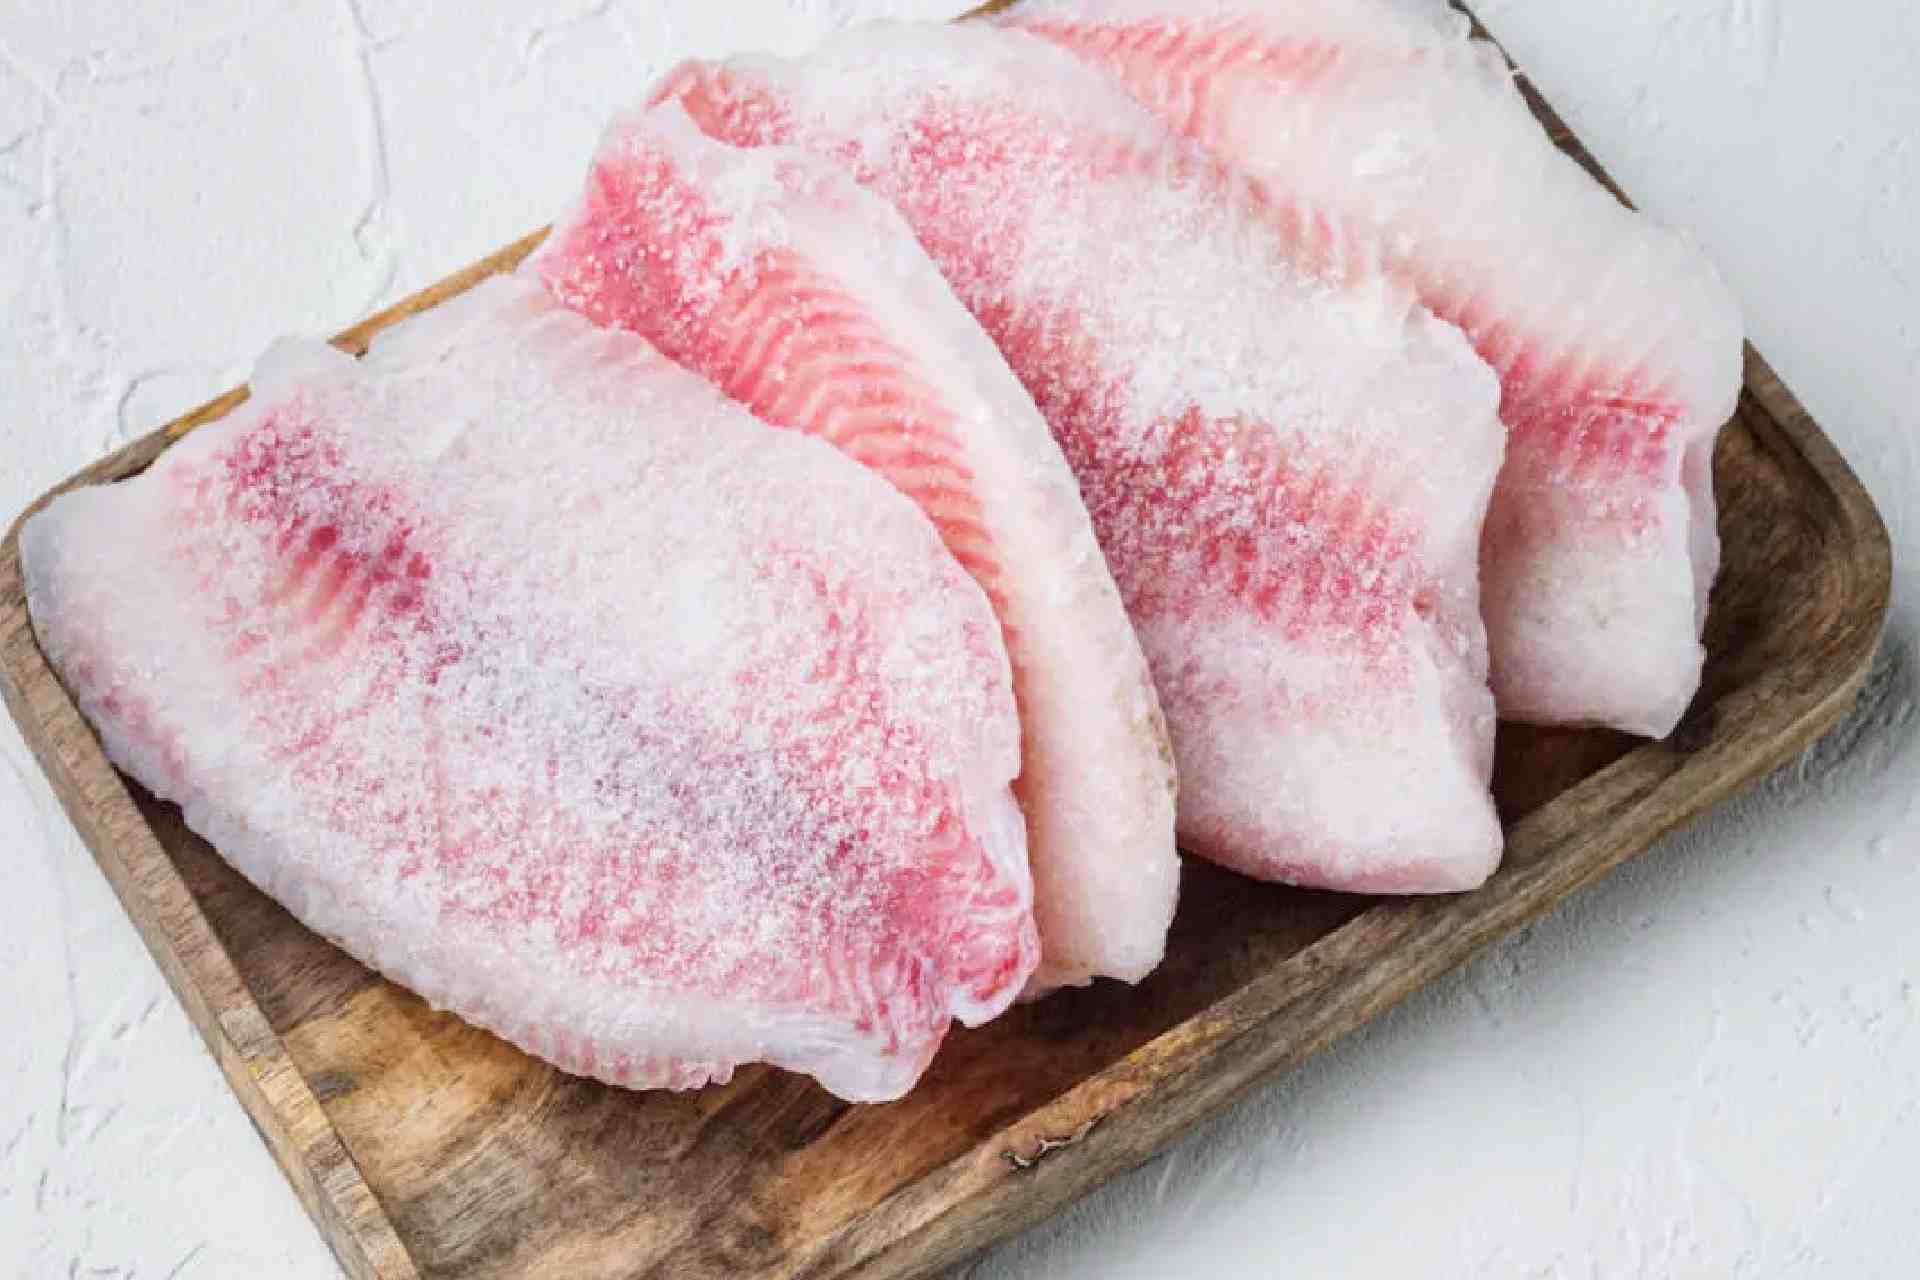 How To Defrost Fish